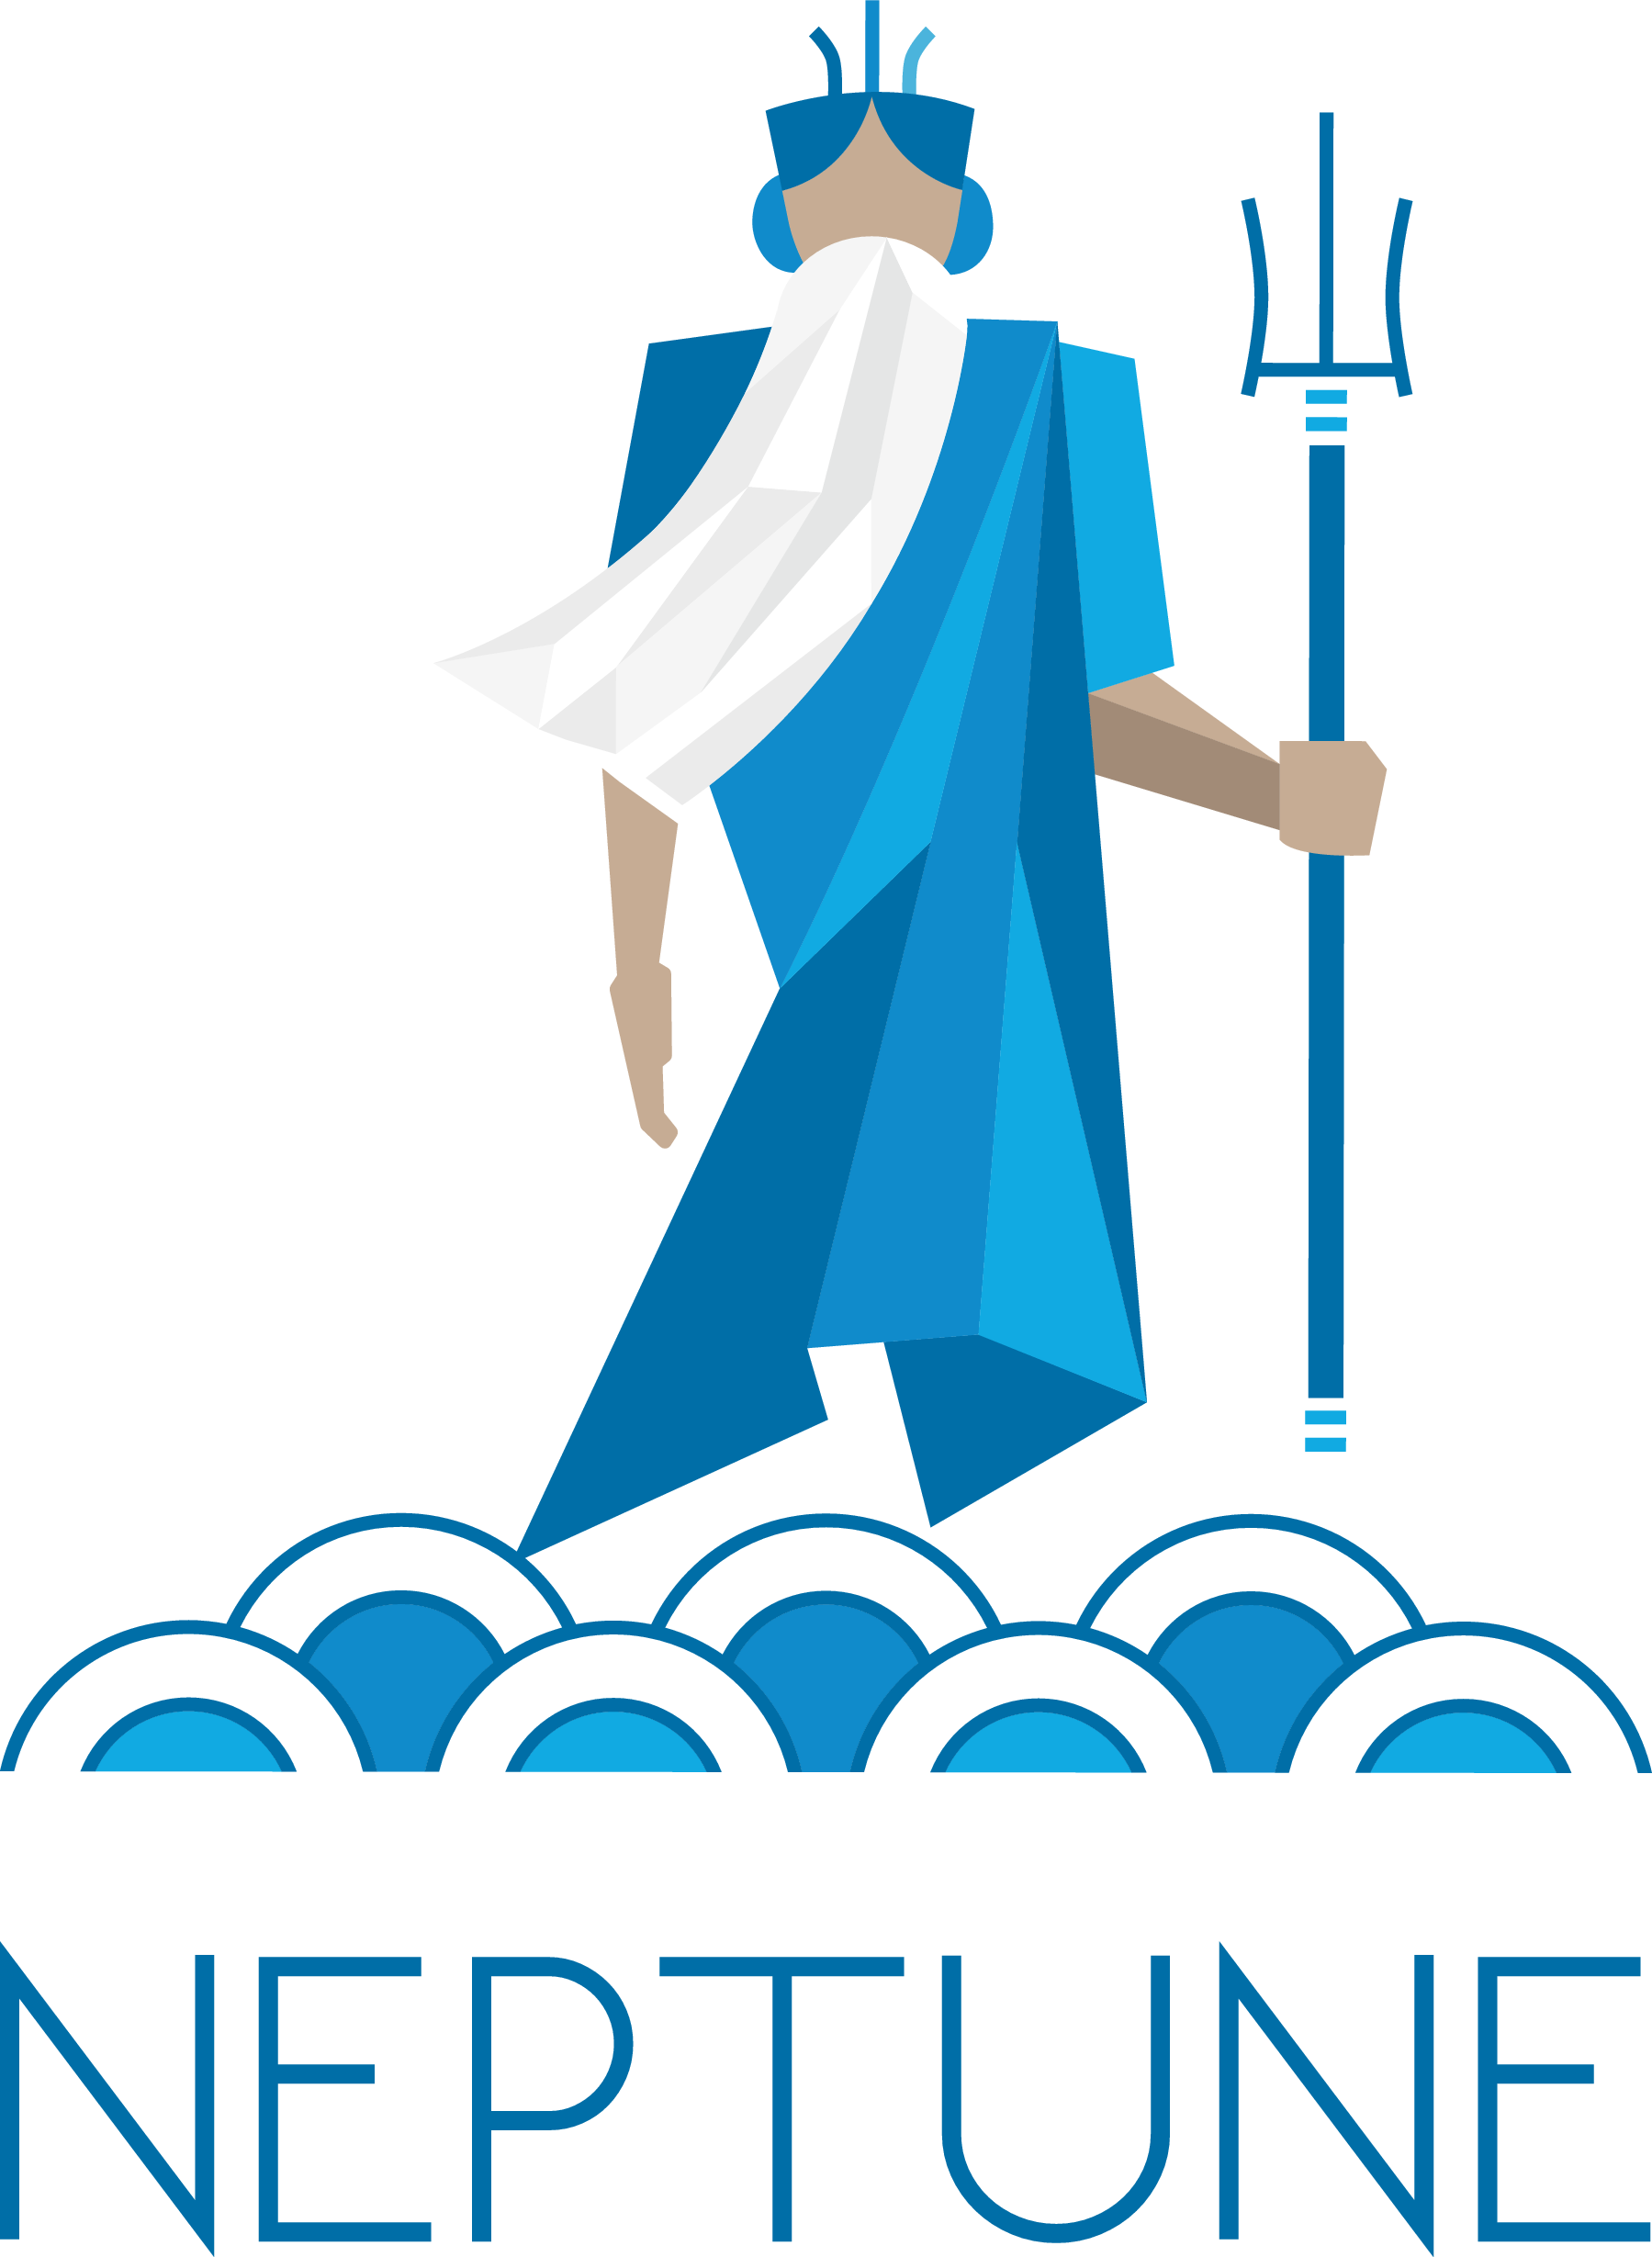 The logo for neptune shows a man in a blue robe holding a trident